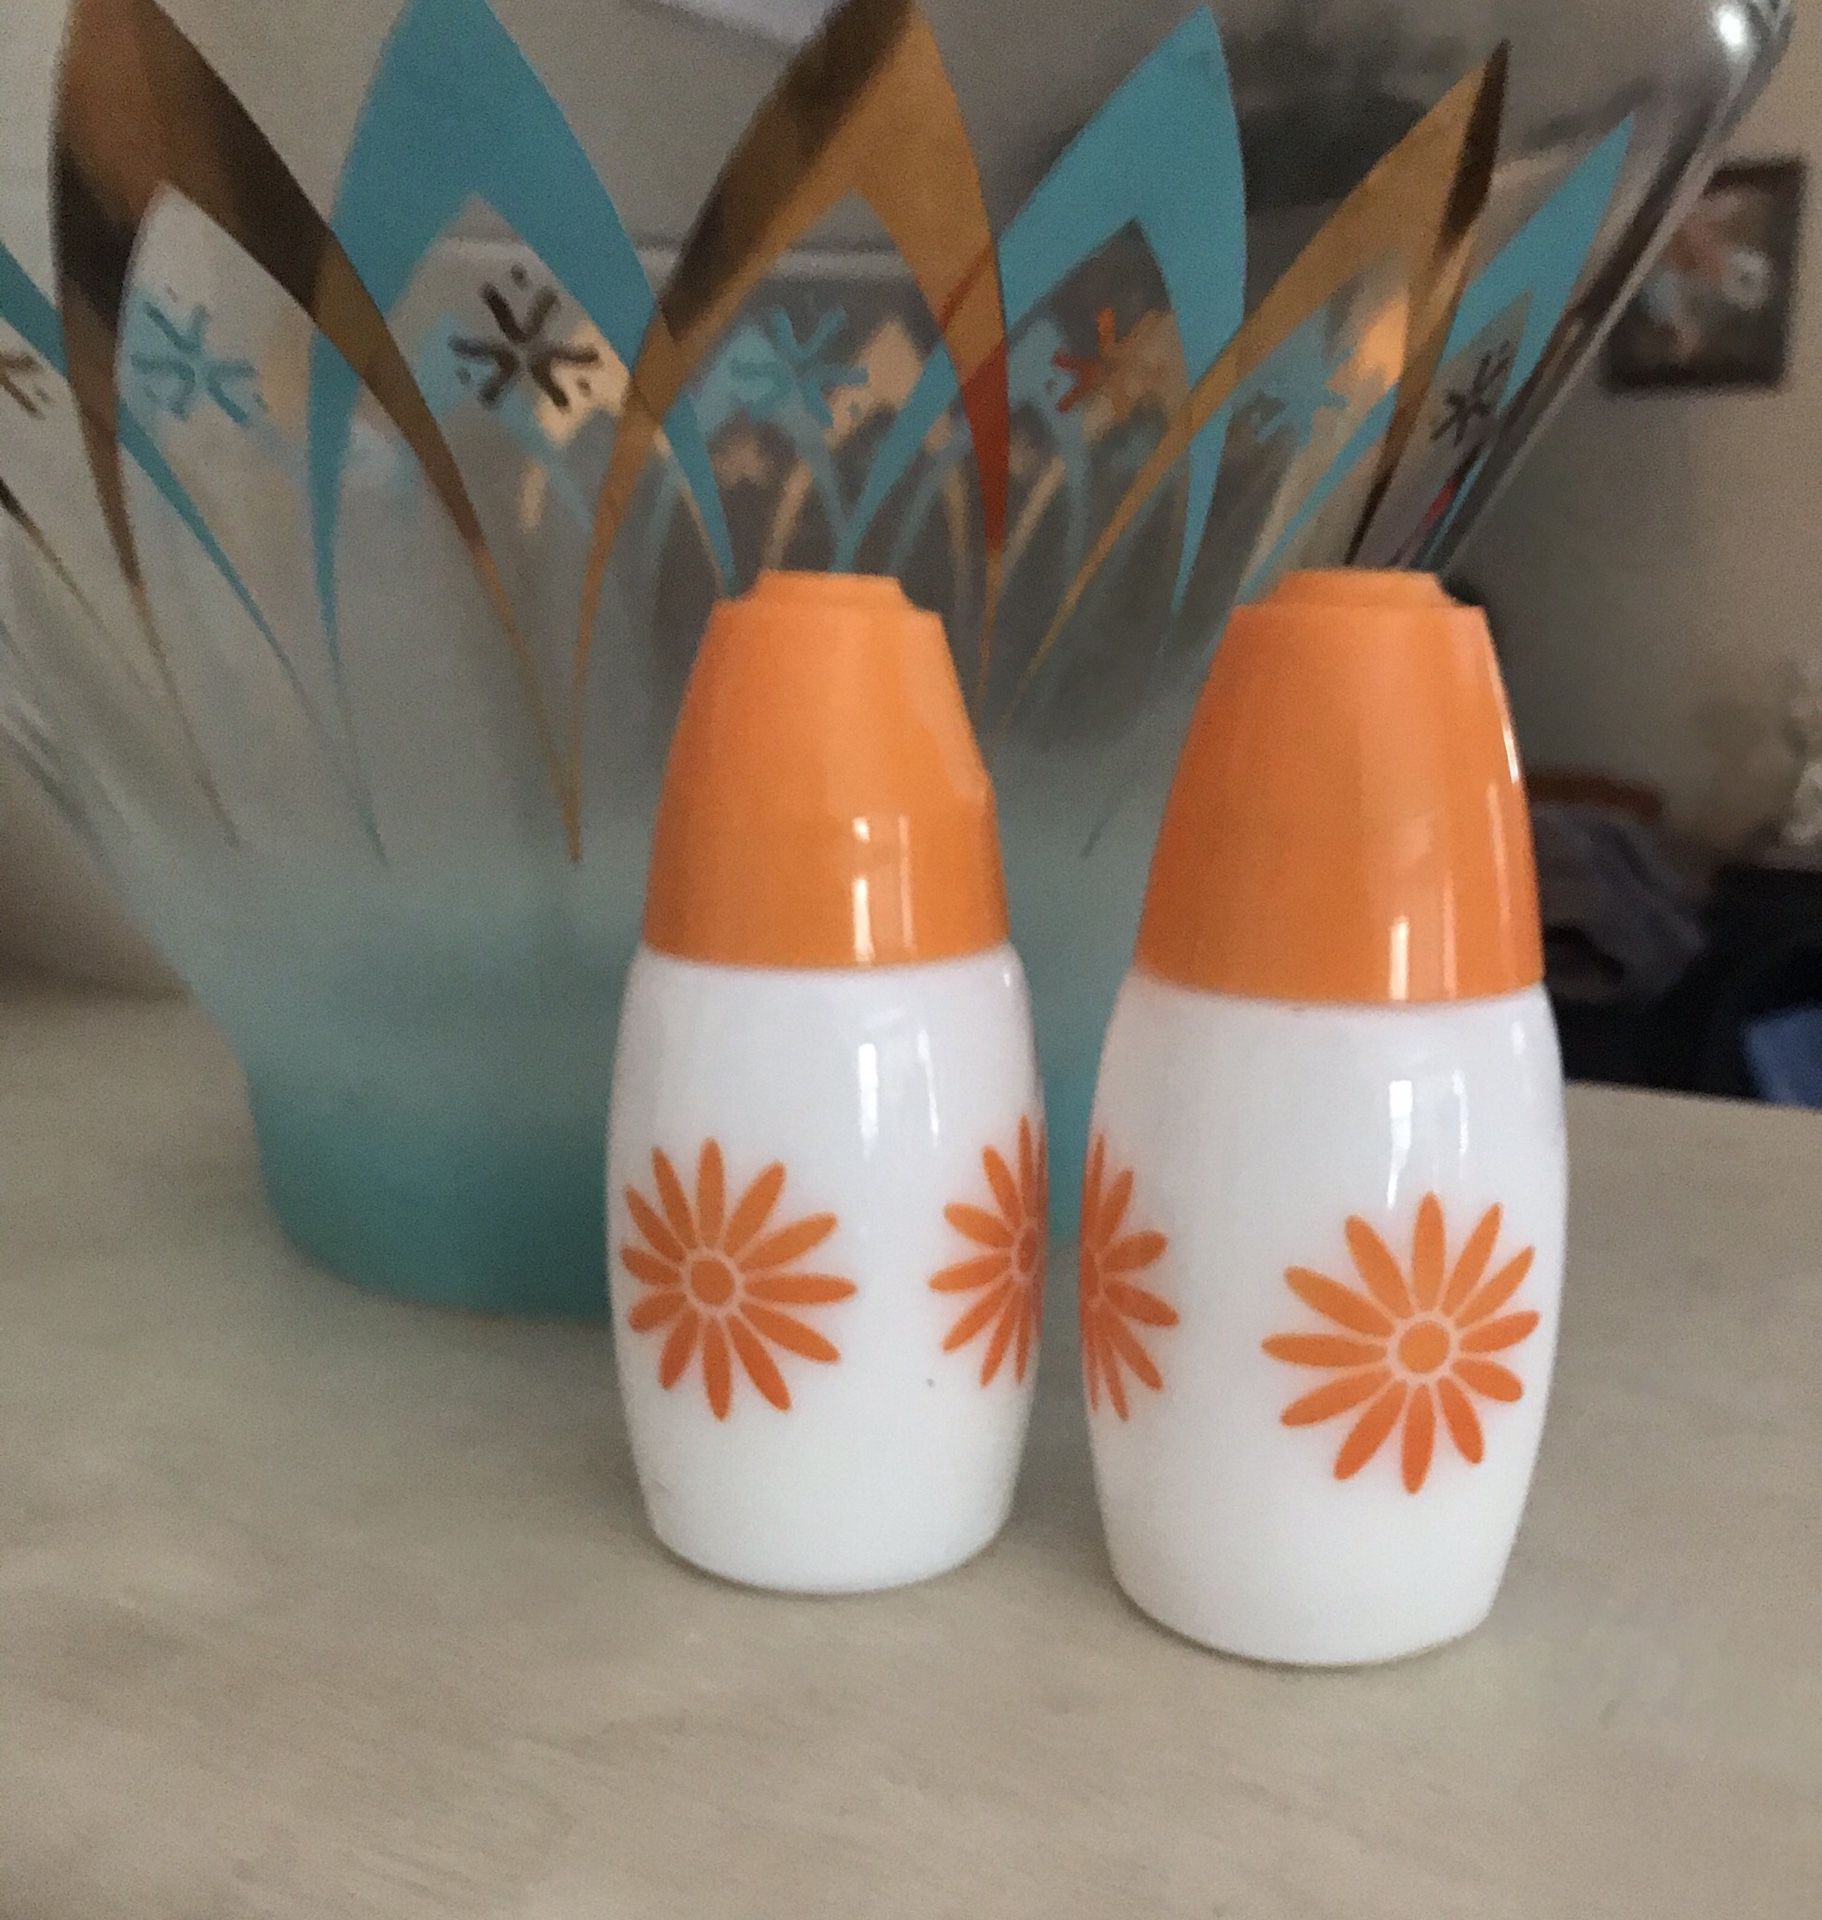 Pyrex salt and pepper shakers